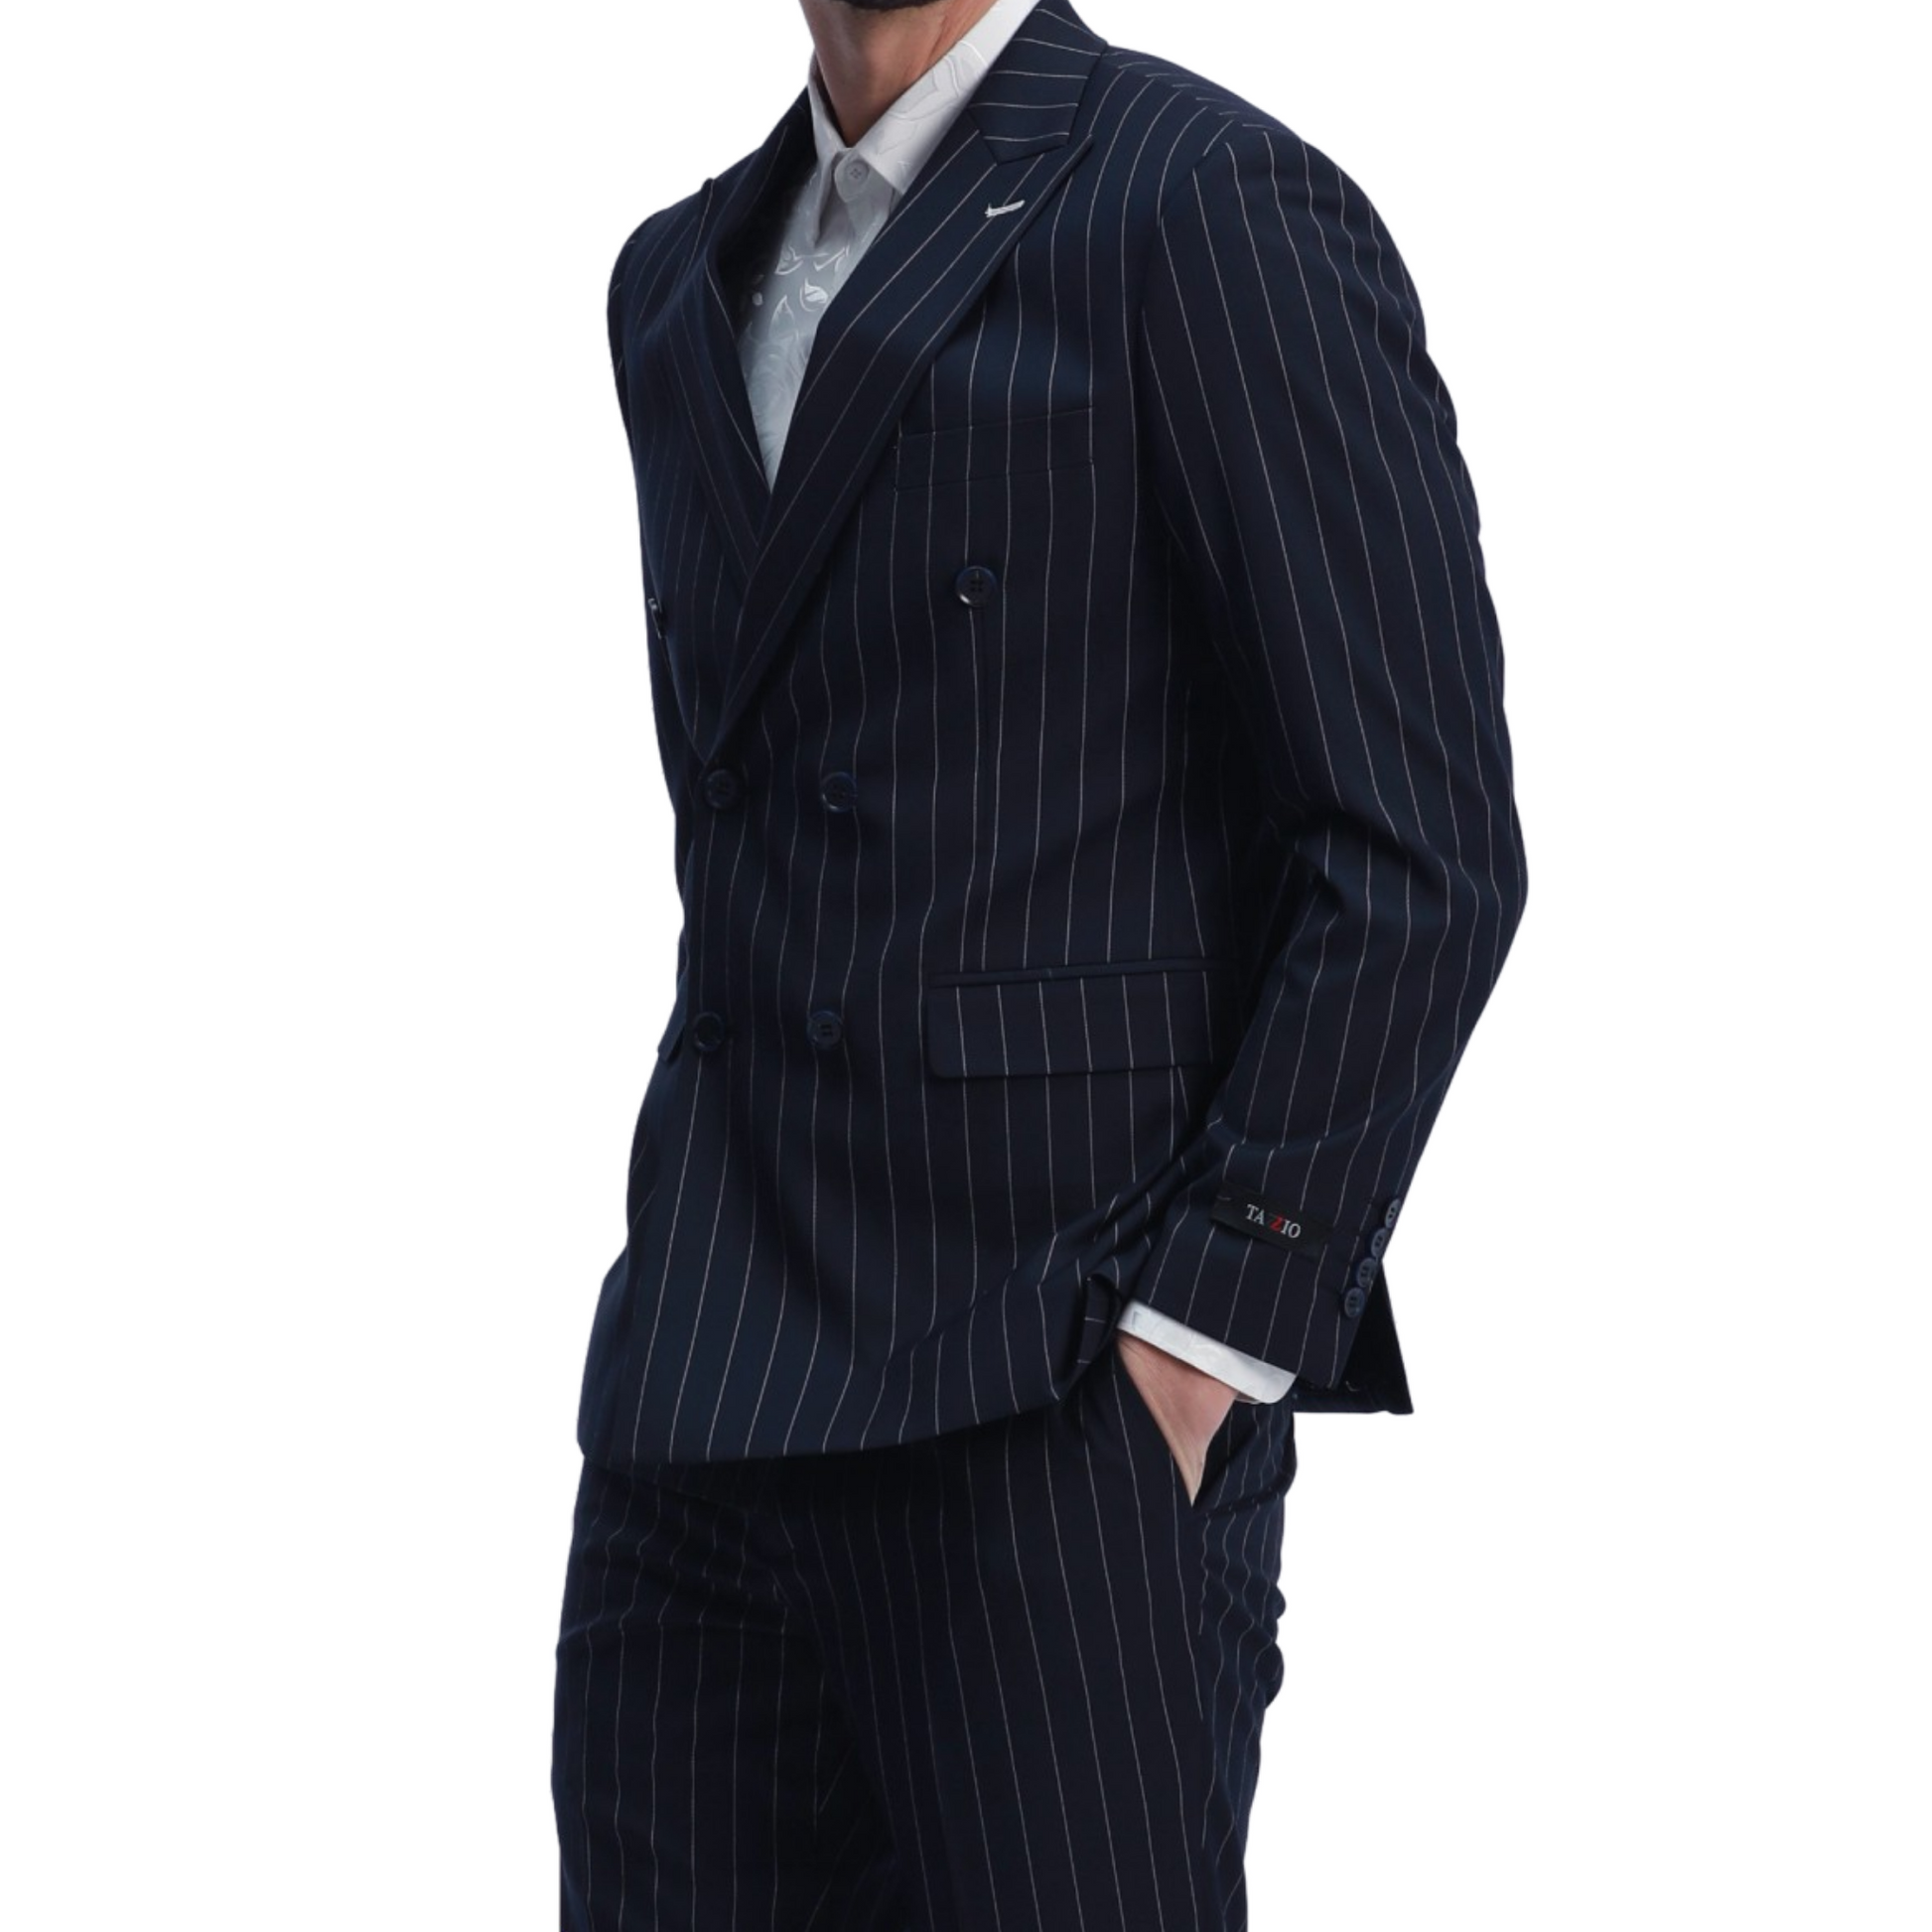 Sharp and sophisticated KCT Menswear Navy Blue Pinstripe Double-Breasted Suit for the modern professional